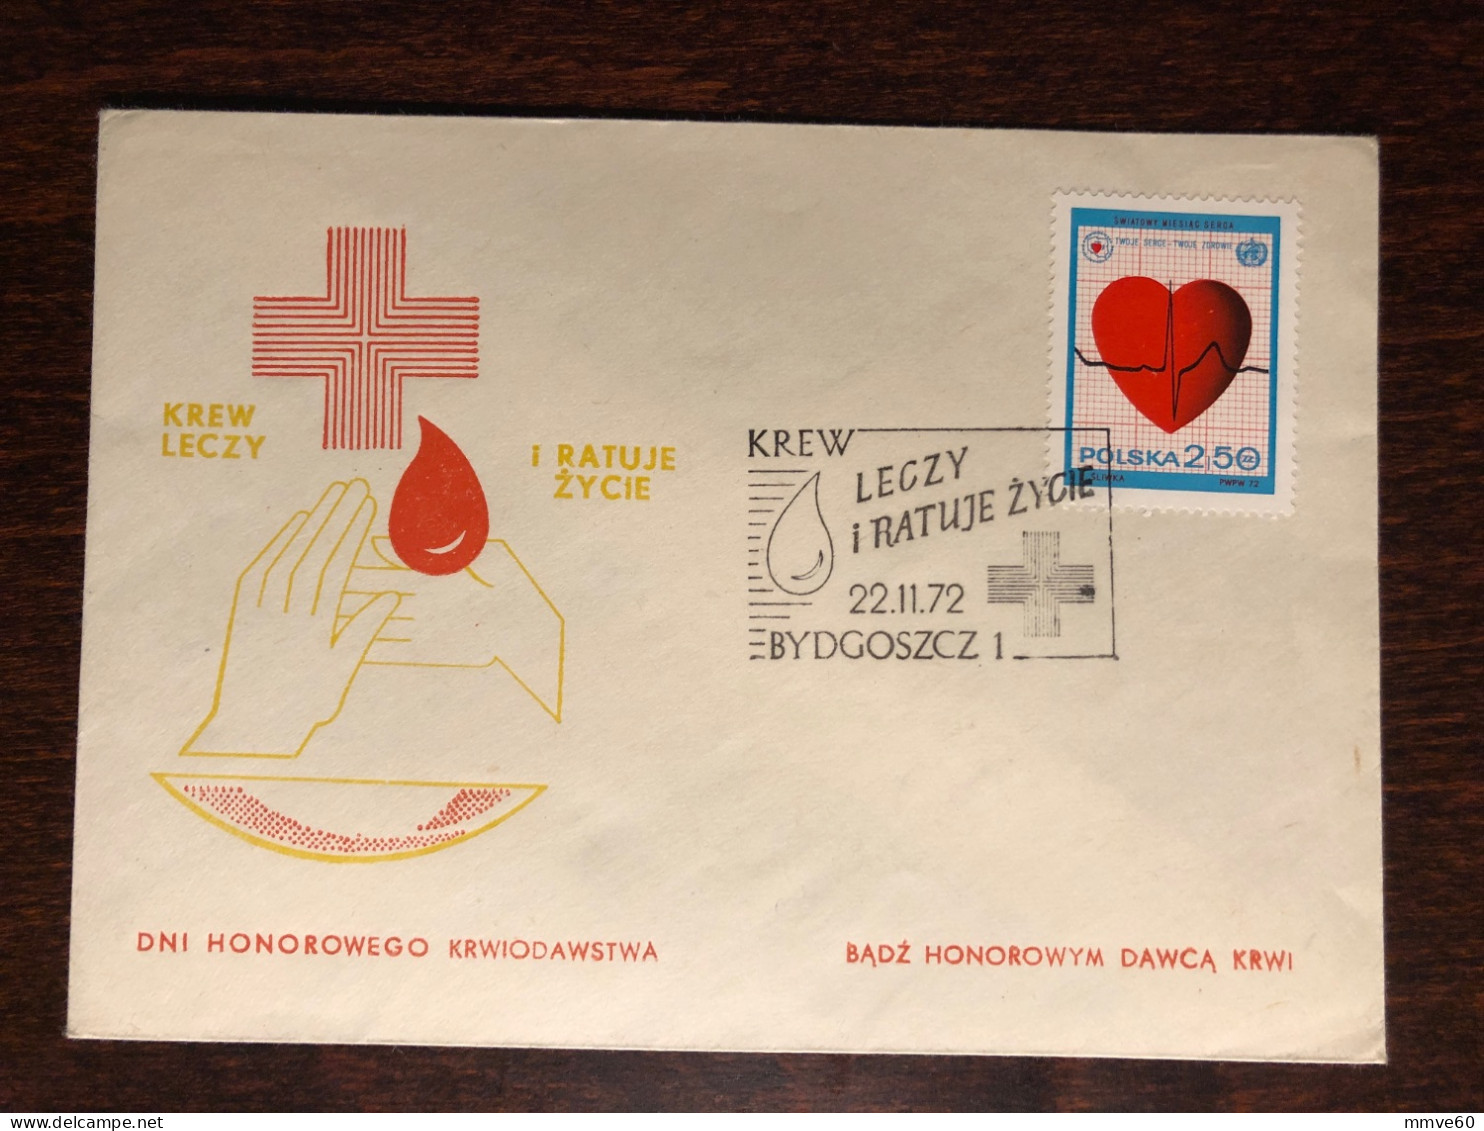 POLAND FDC COVER 1972 YEAR CARDIOLOGY HEART HEALTH MEDICINE STAMPS - FDC